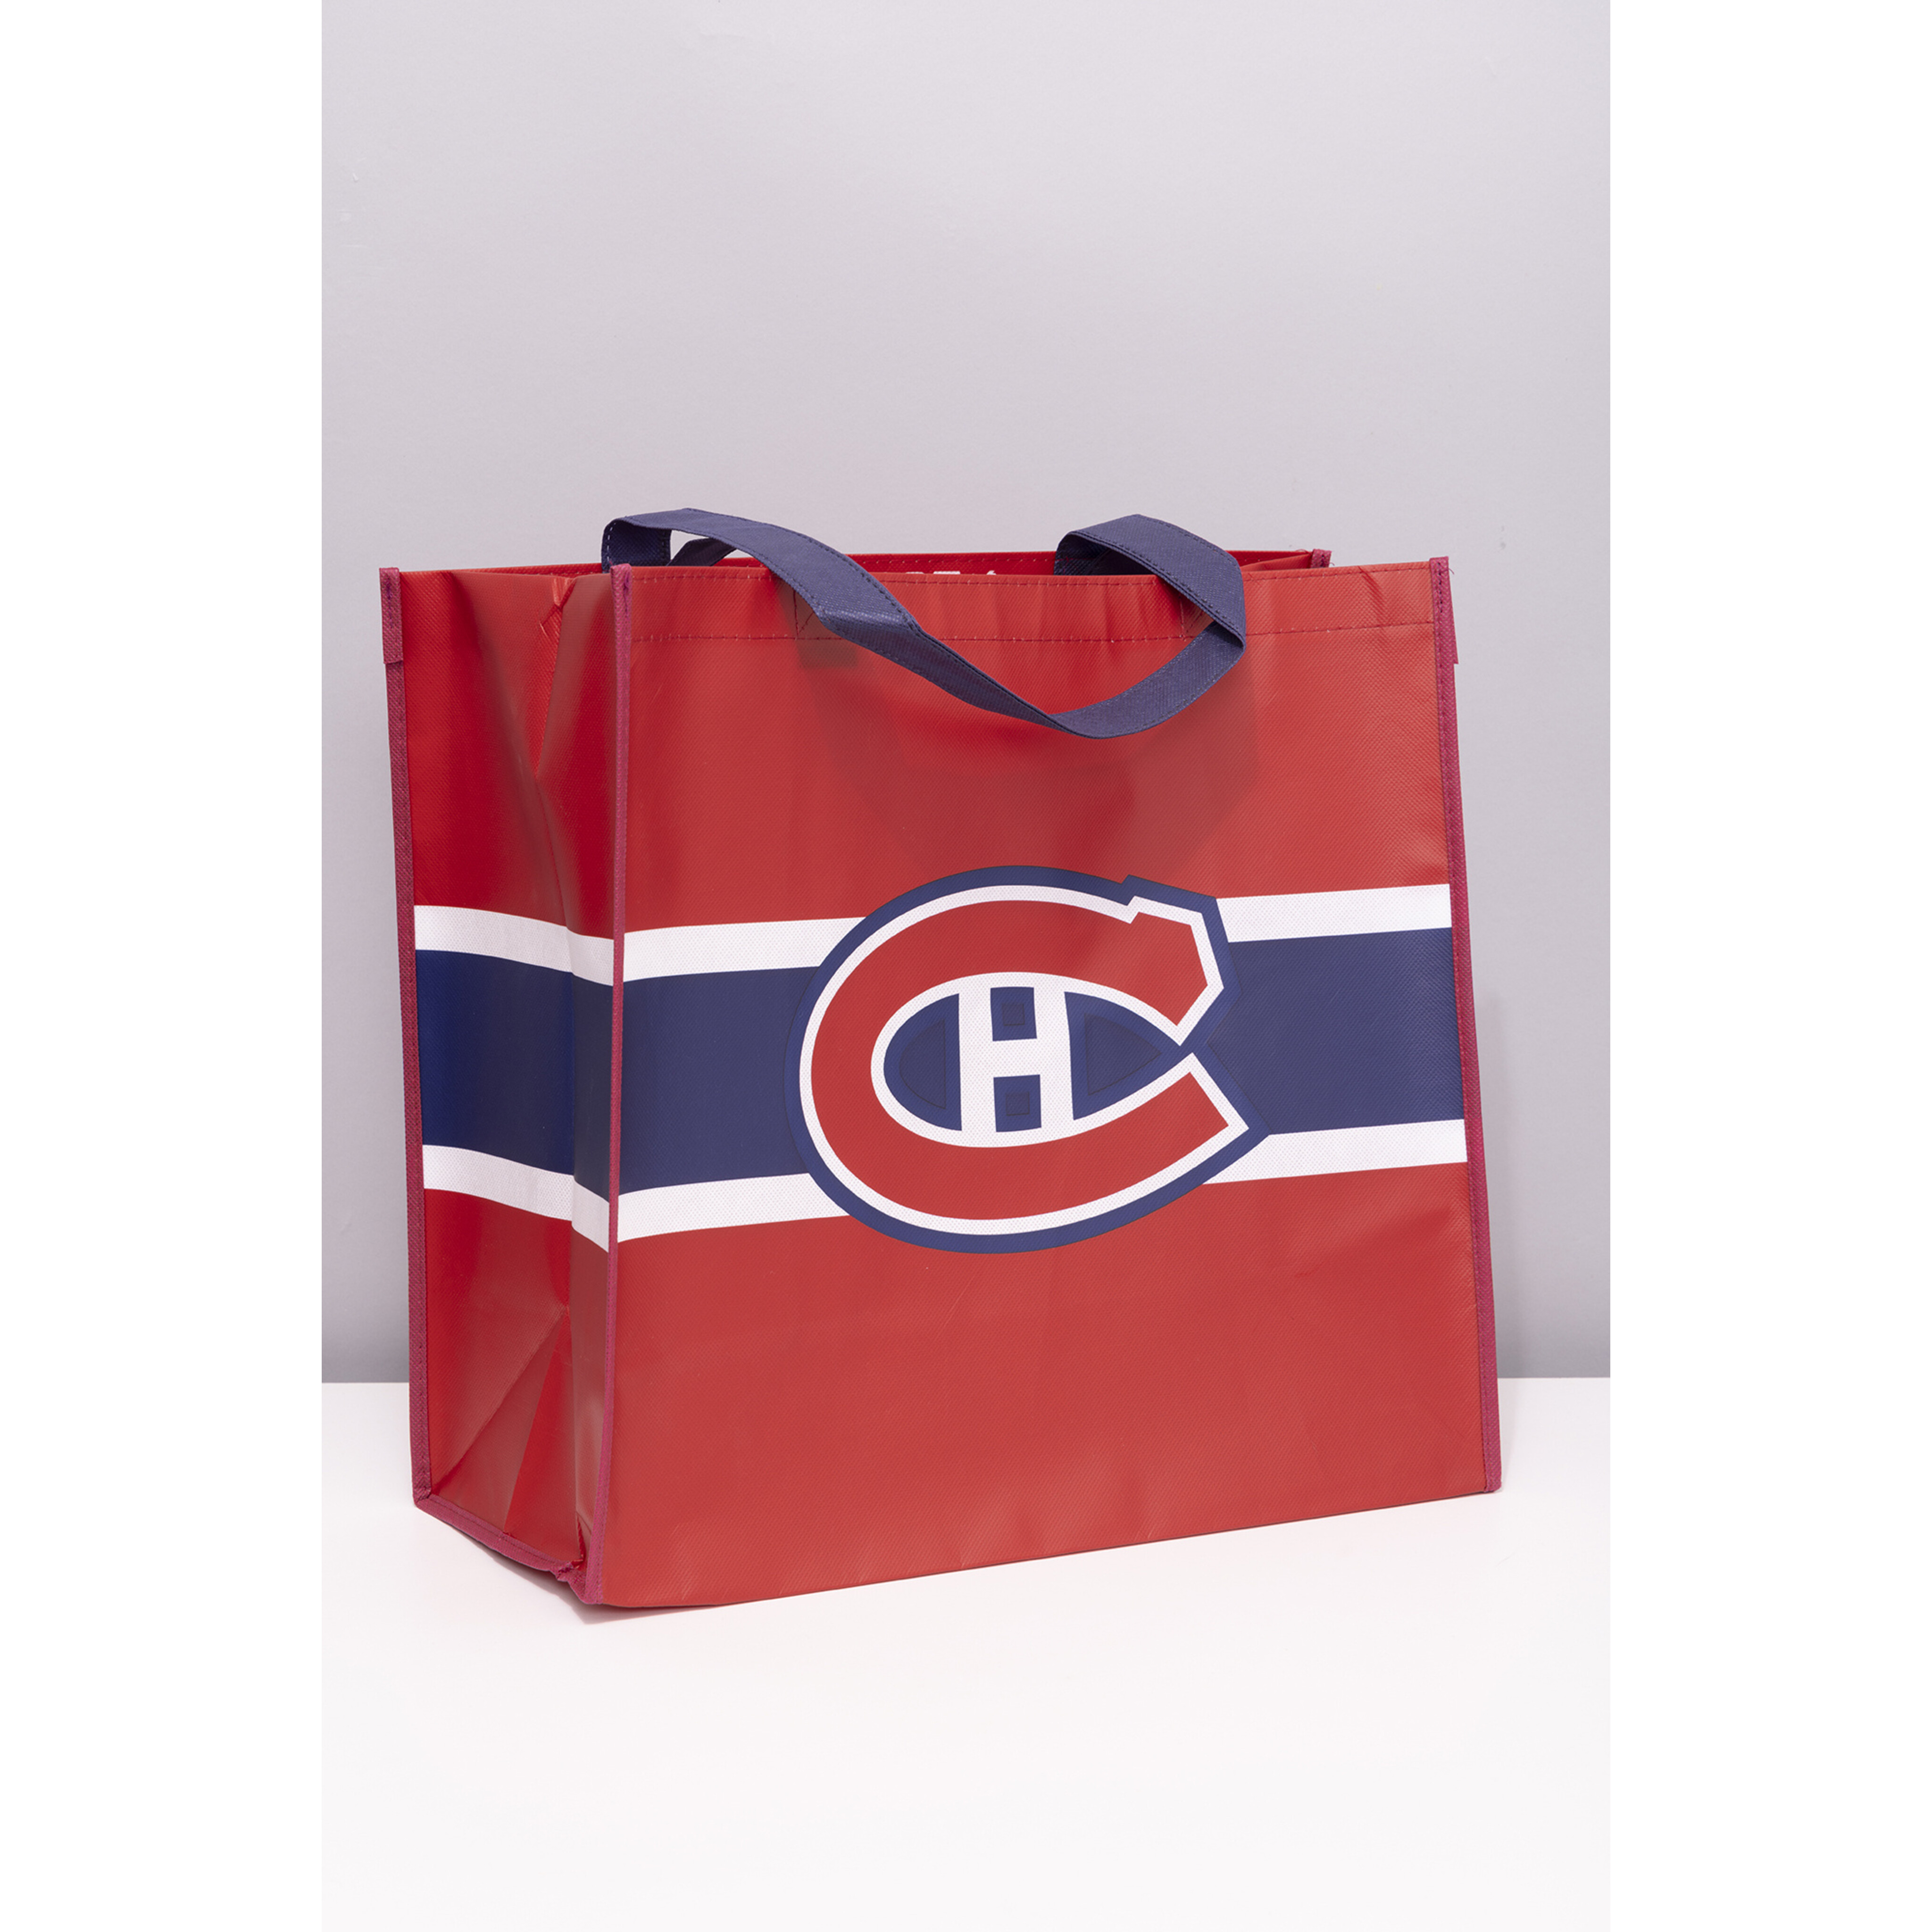 Montreal Canadiens Store - Tricolore Sports